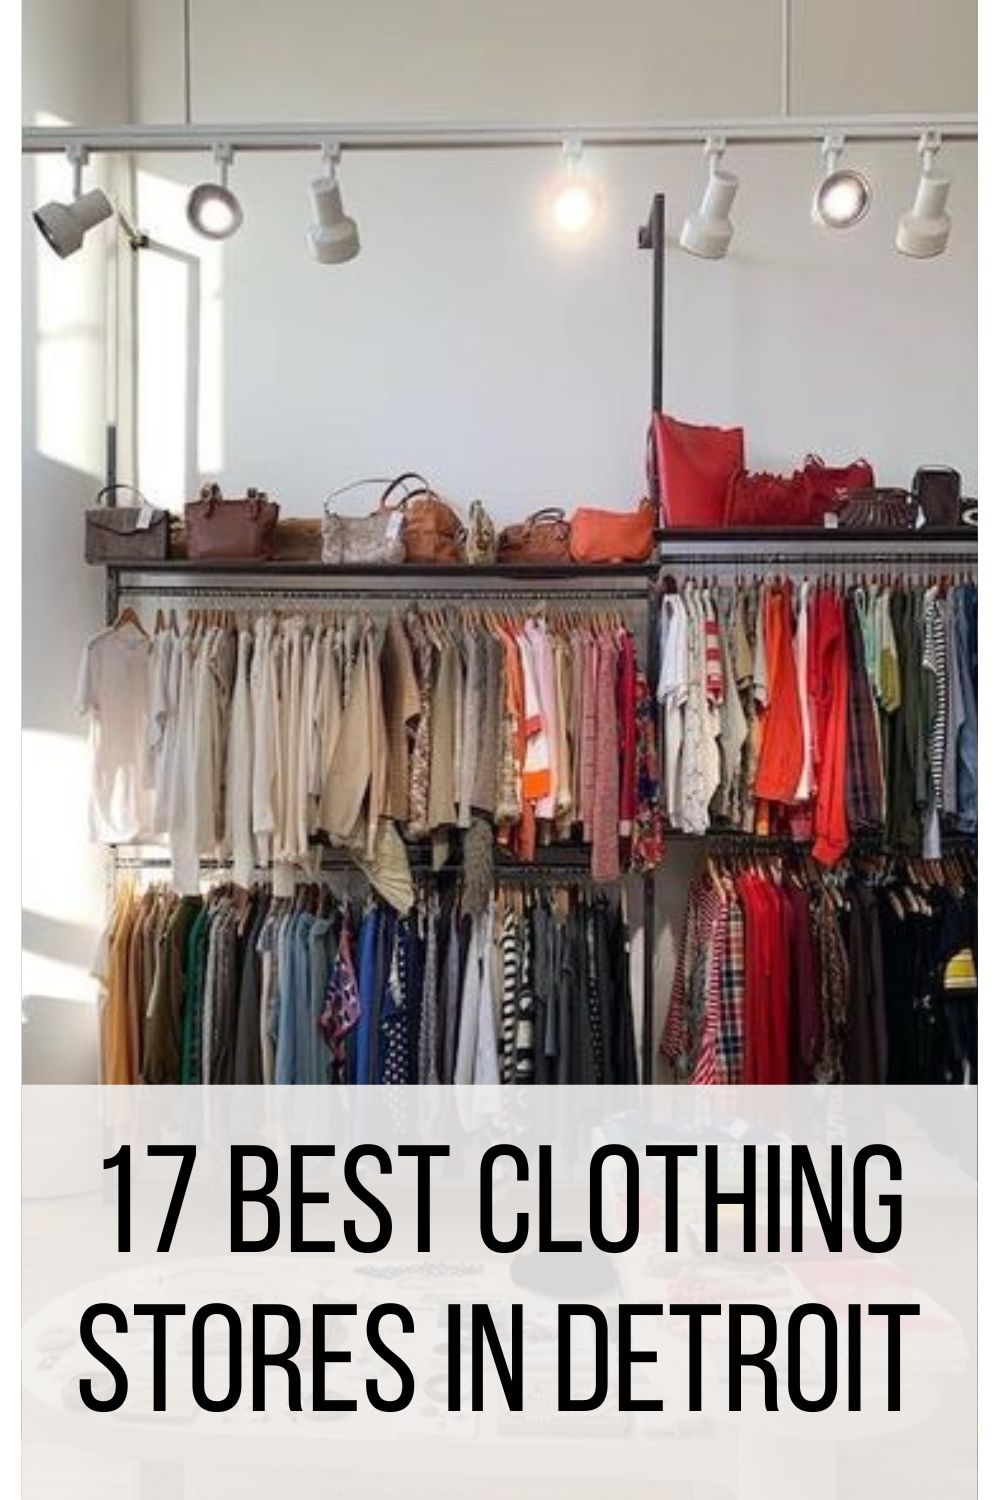 17 Best Clothing Stores in Detroit